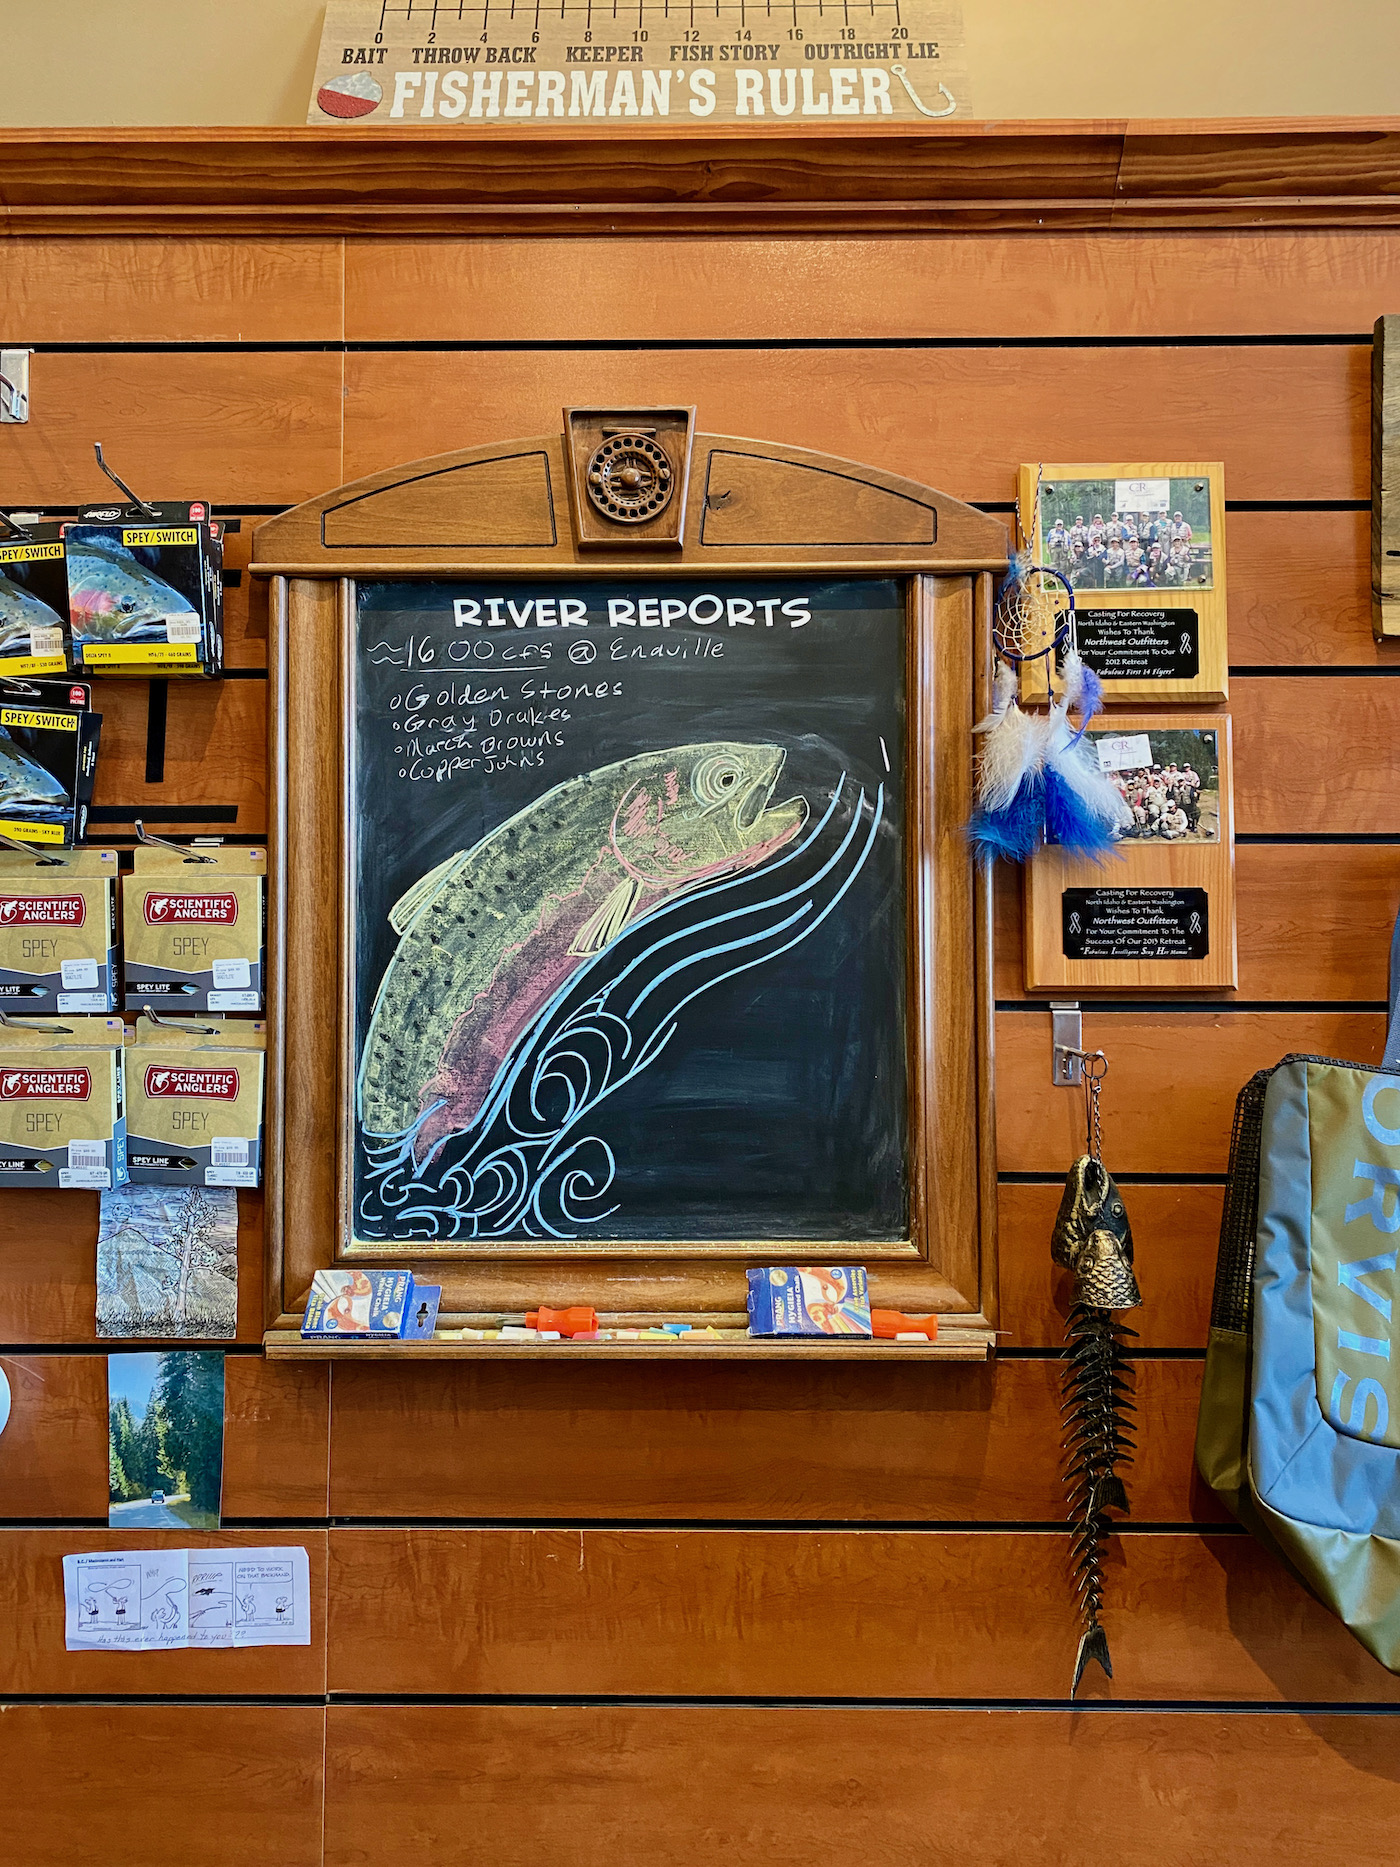 River report sign in a fly fishing shop with a chalk drawn trout